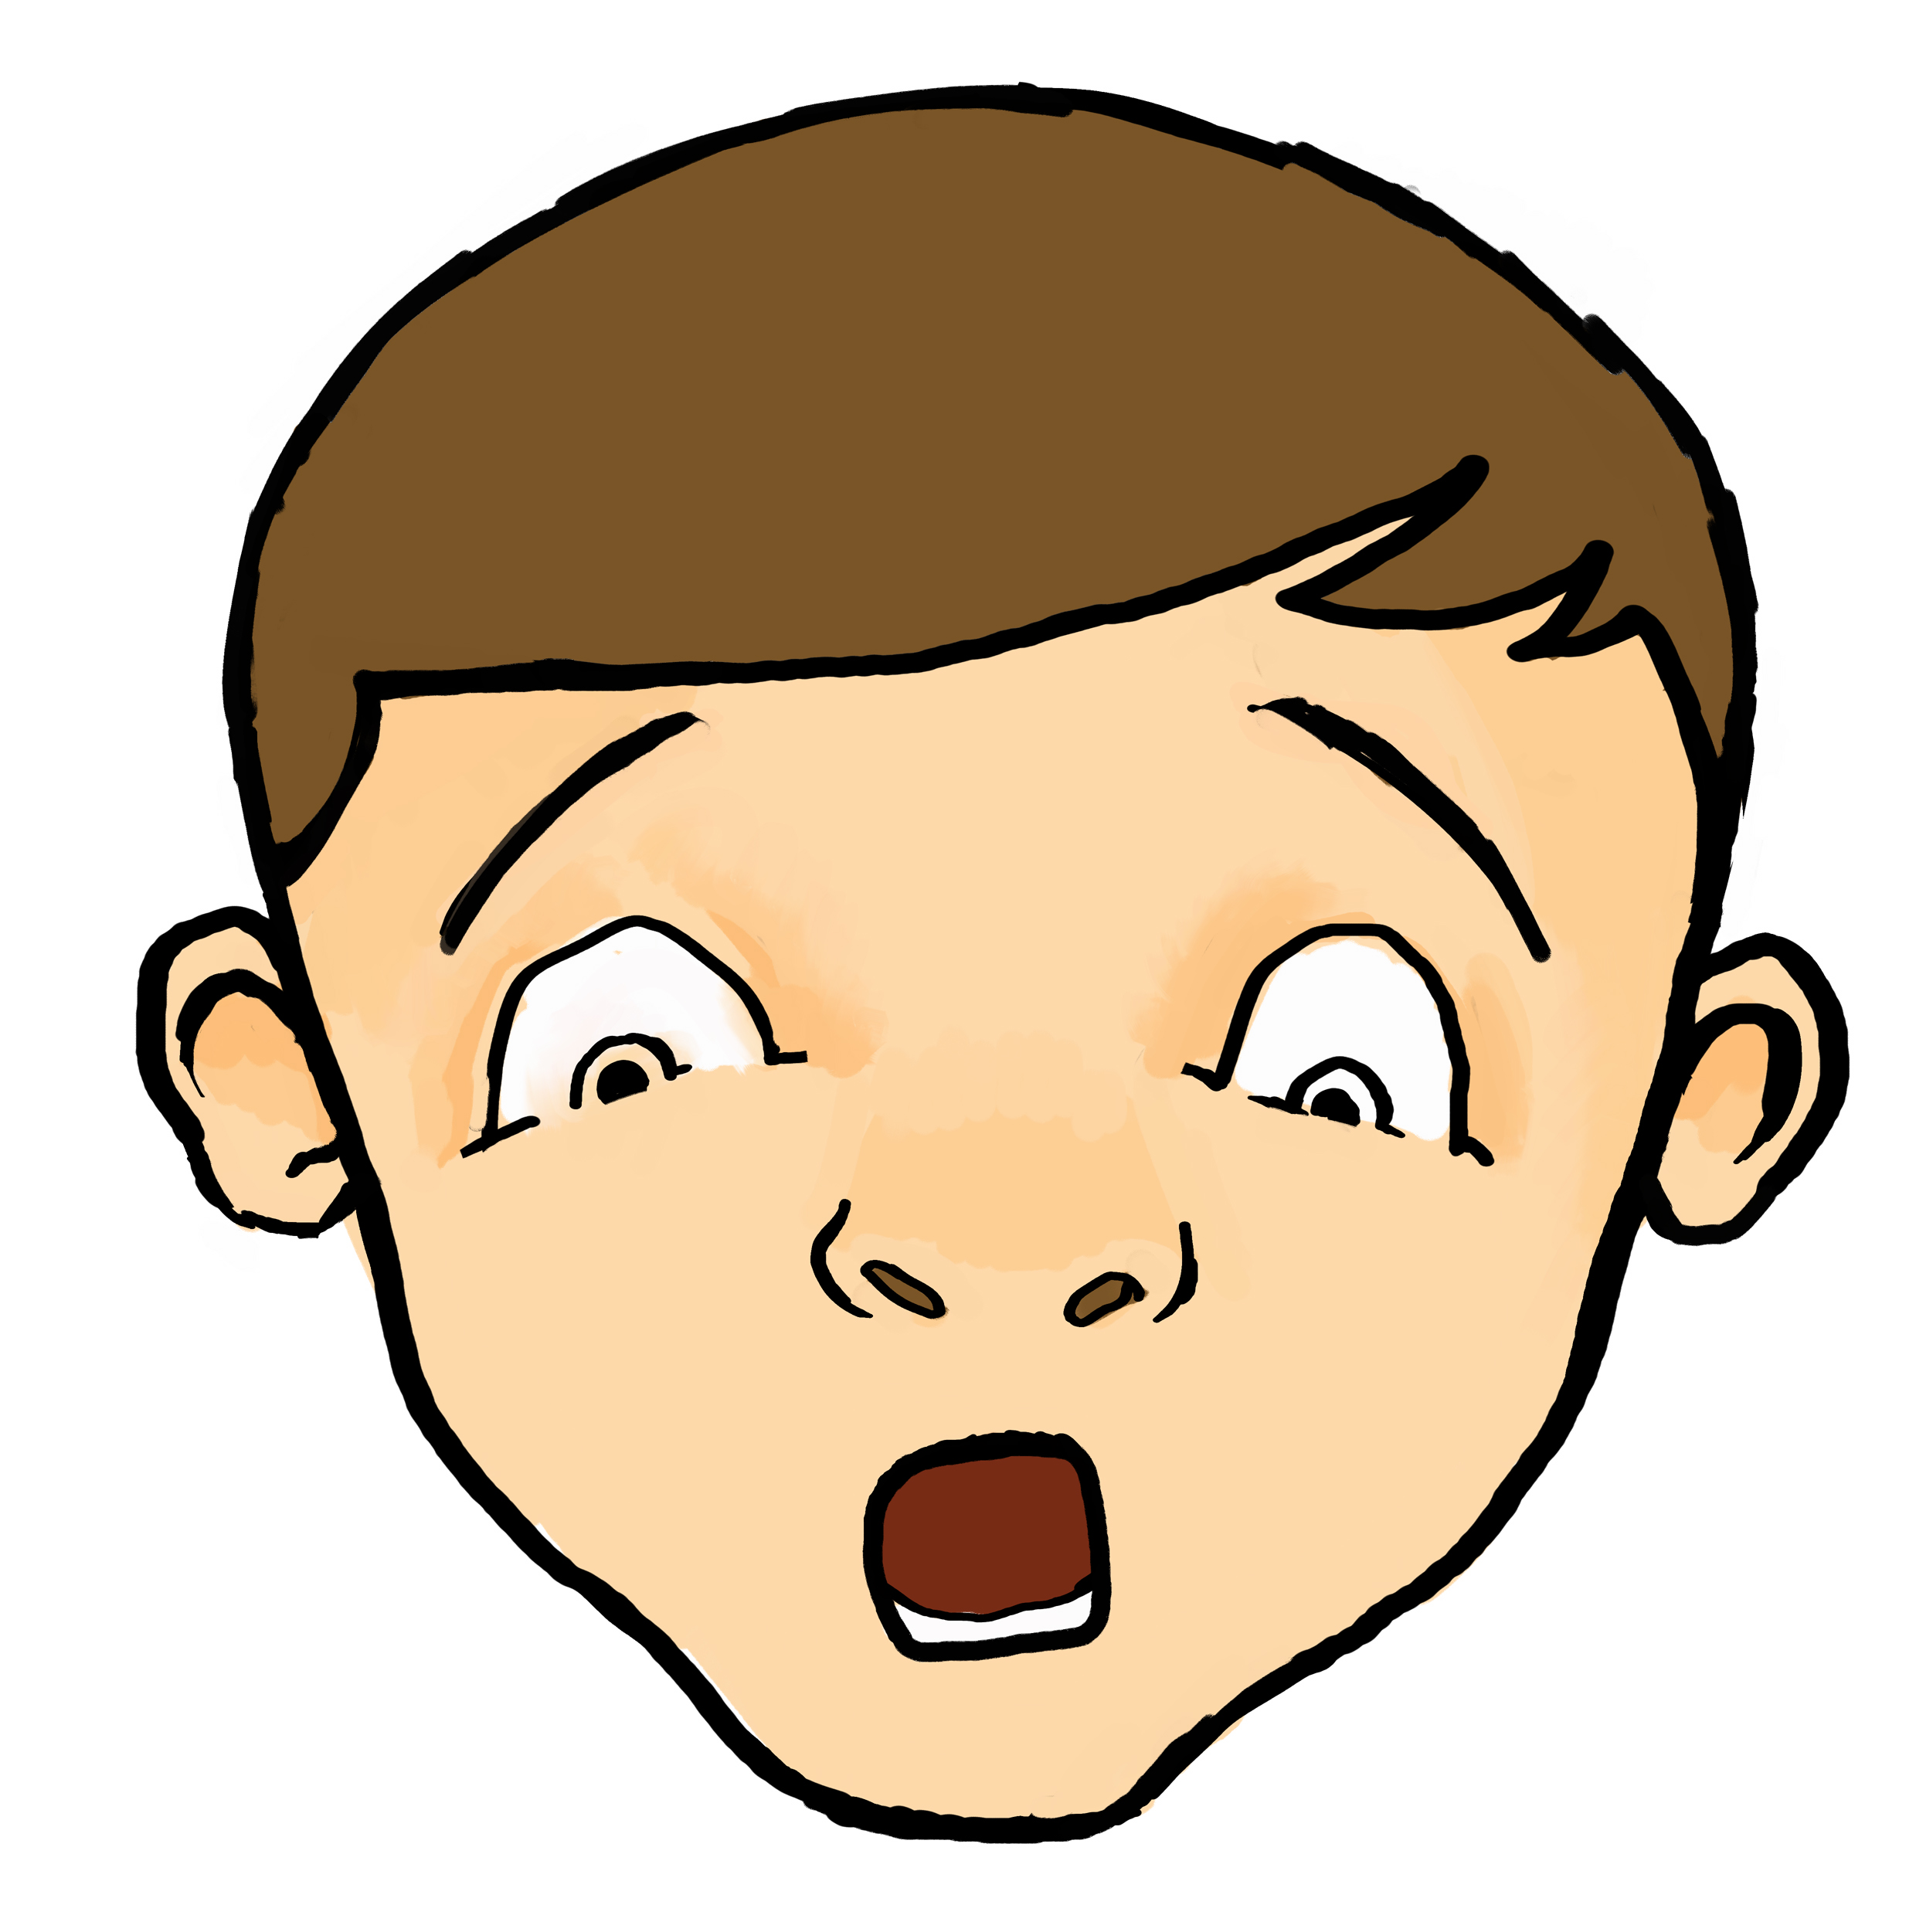 Free Afraid Face Cliparts, Download Free Clip Art, Free Clip.